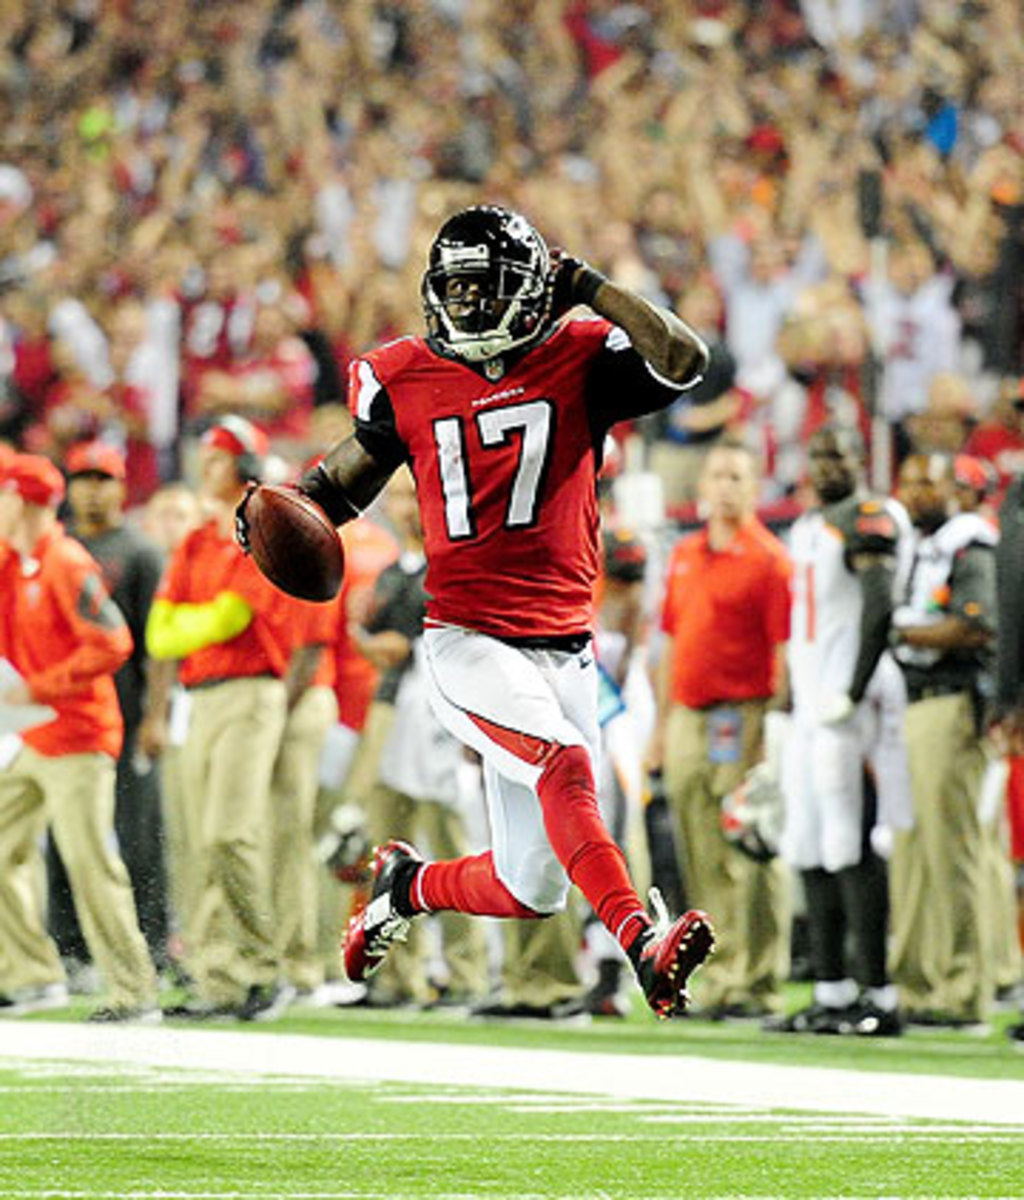 Devin Hester paid tribute to the man whose record he broke—Deion Sanders—on his 20th career return for a touchdown. (Scott Cunningham/Getty Images)